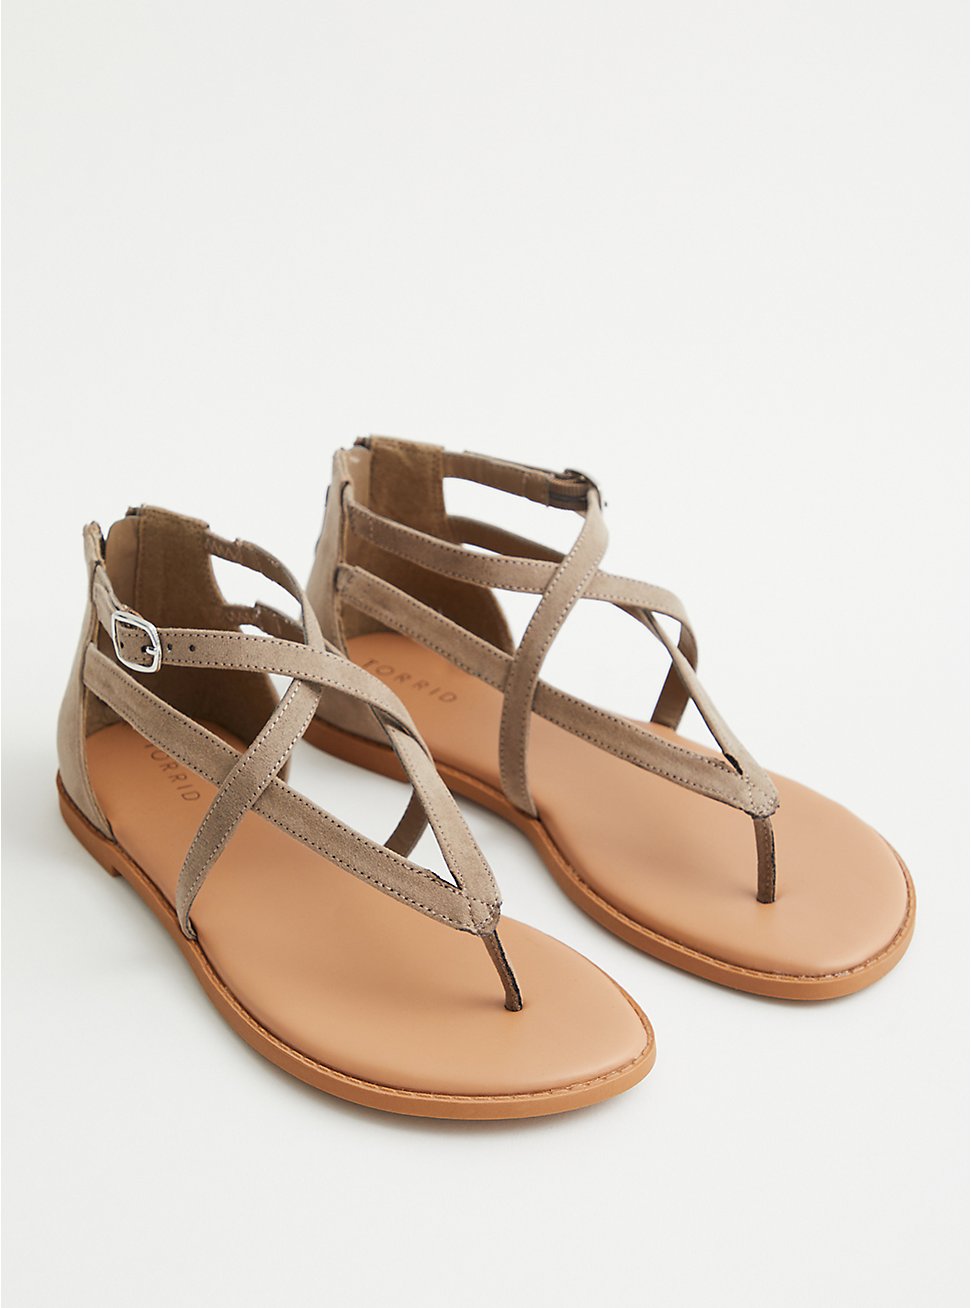 Plus Size T-Strap Sandal - Faux Suede Taupe (WW), TAUPE, hi-res